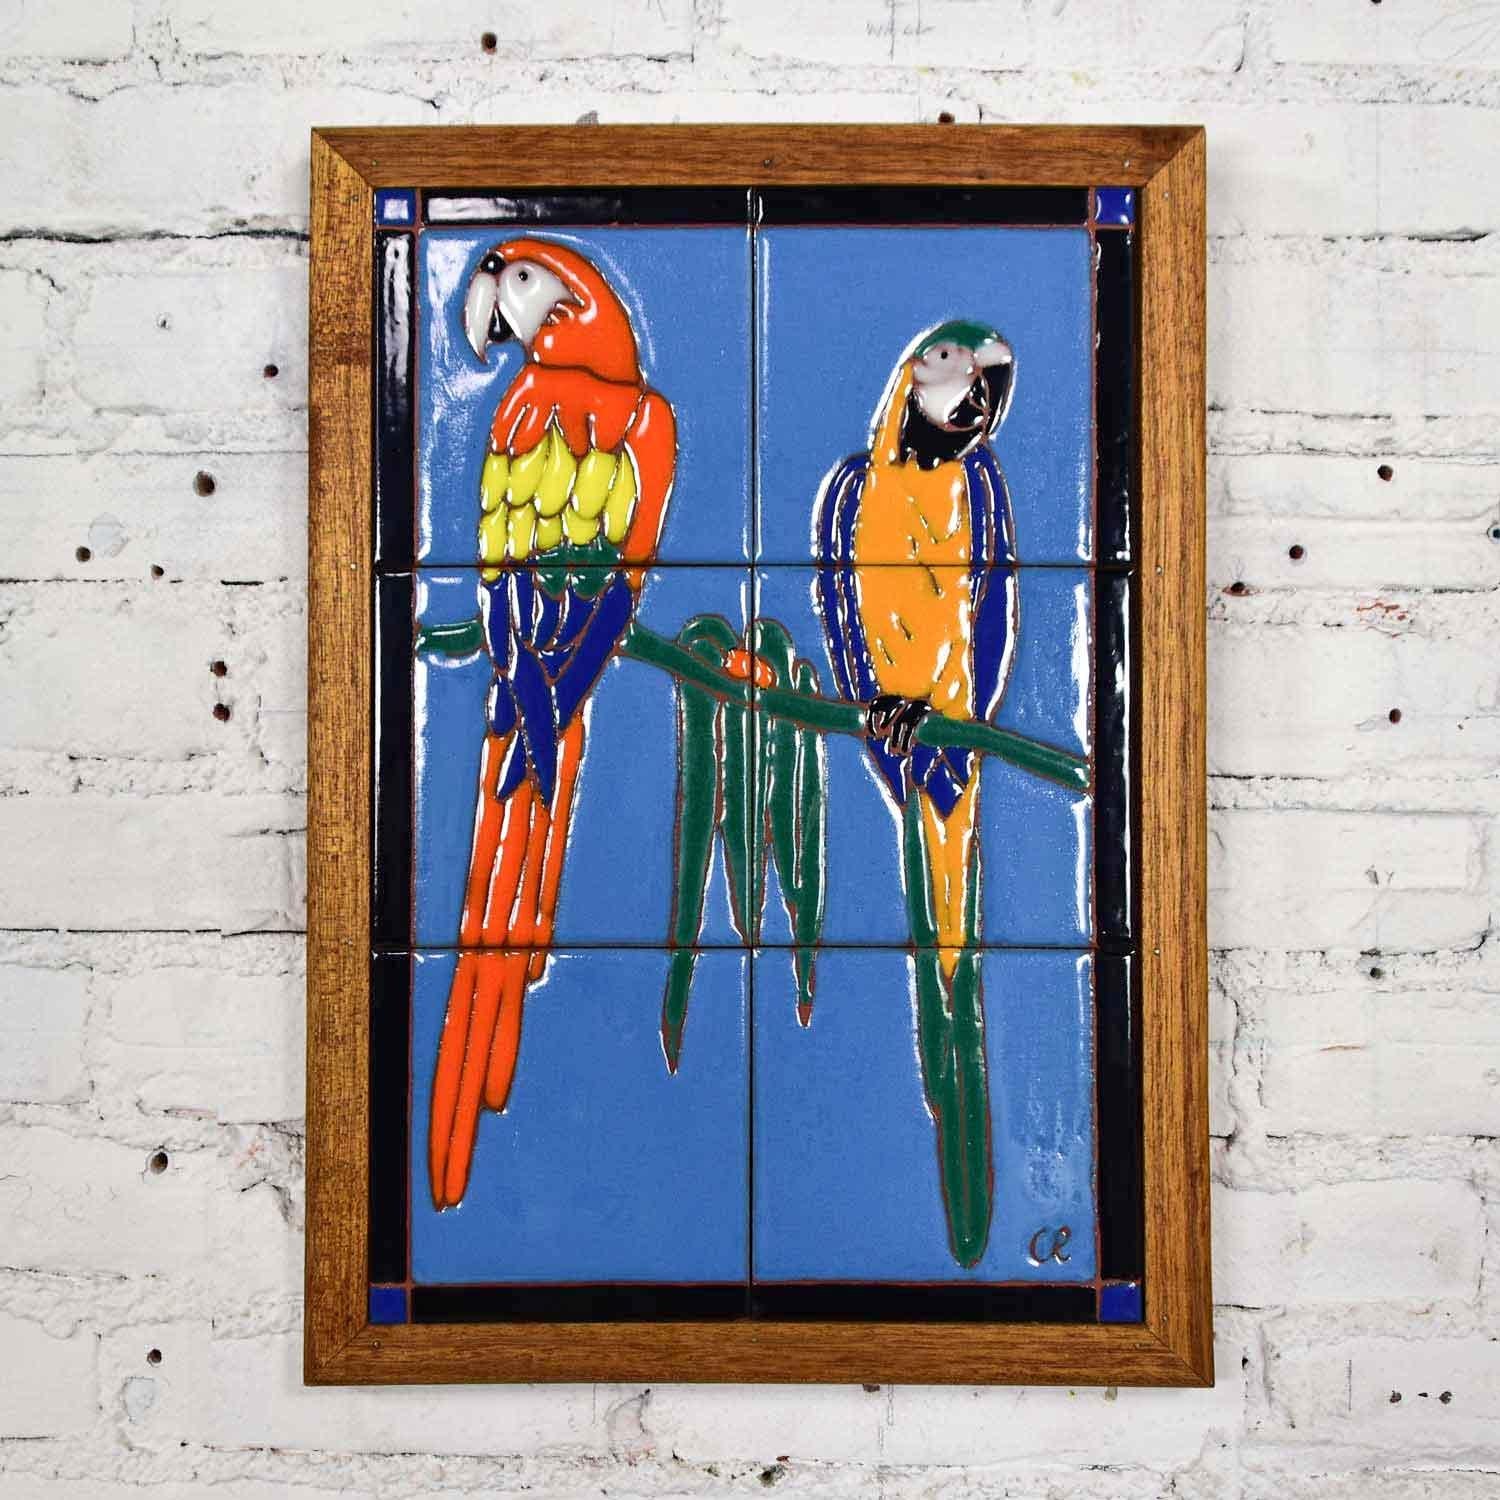 Marvelous vintage Catalina style majolica parrot ceramic tile plaque by Christopher Reutinger for Catalina Picture Tile (formerly named Palisade Tile which is what this piece is marked). Incised and embedded in a rich mahogany frame. Beautiful